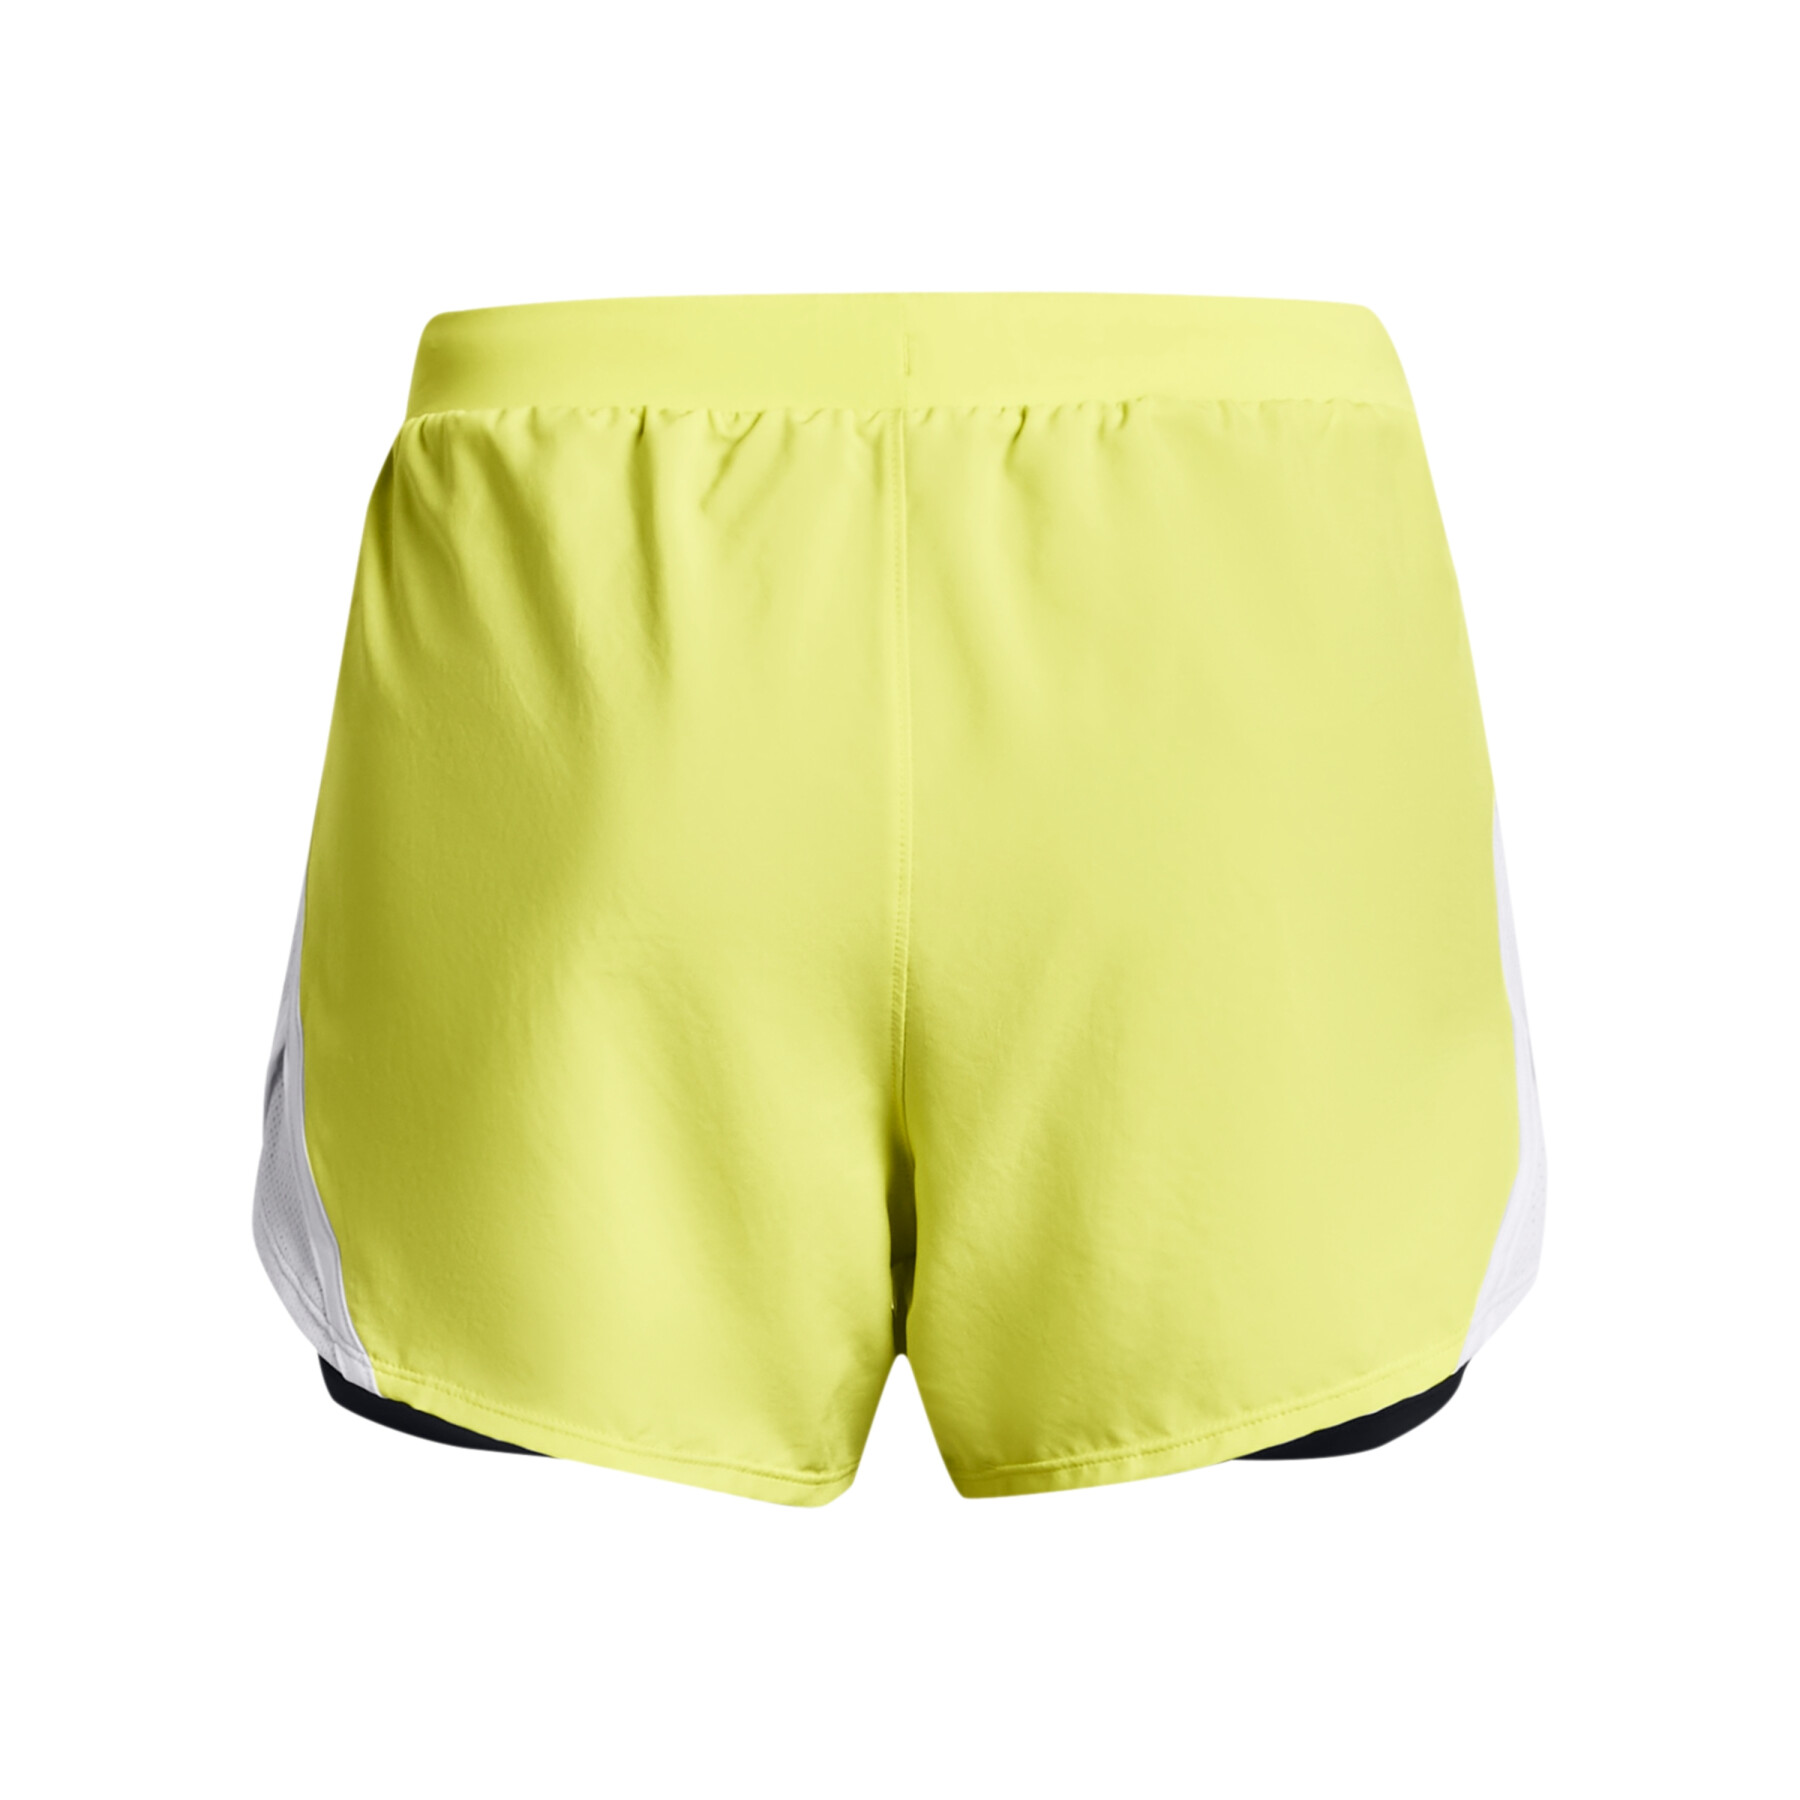 Women's 2-in-1 shorts Under Armour Fly By 2.0